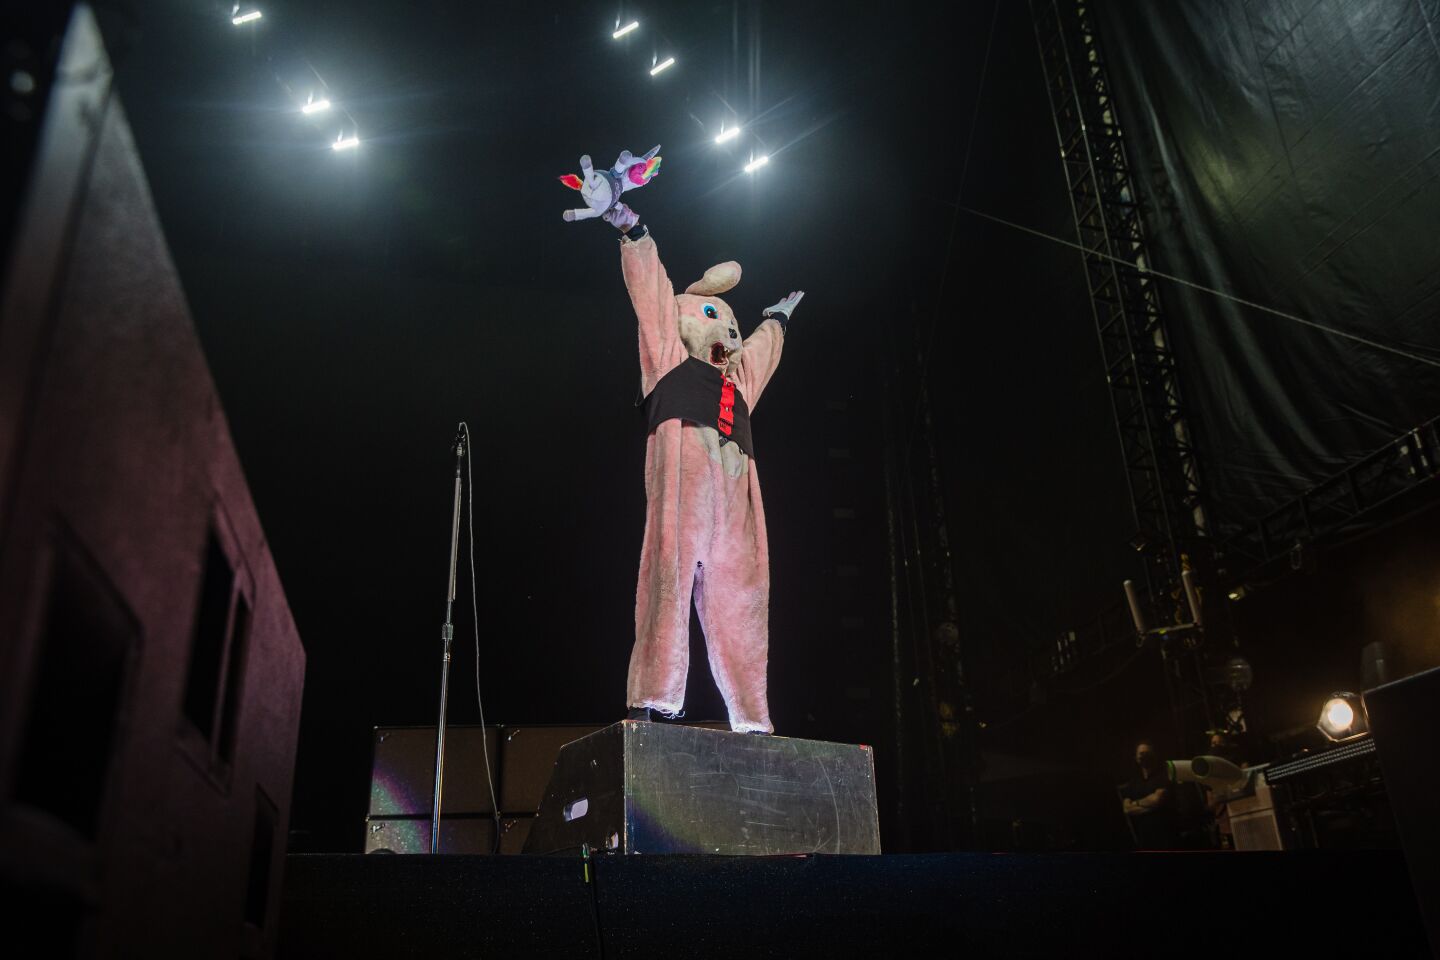 A pink bunny on stage before Green Day plays their set at the Hella Mega Tour at Petco Park in downtown San Diego on August 29, 2021.